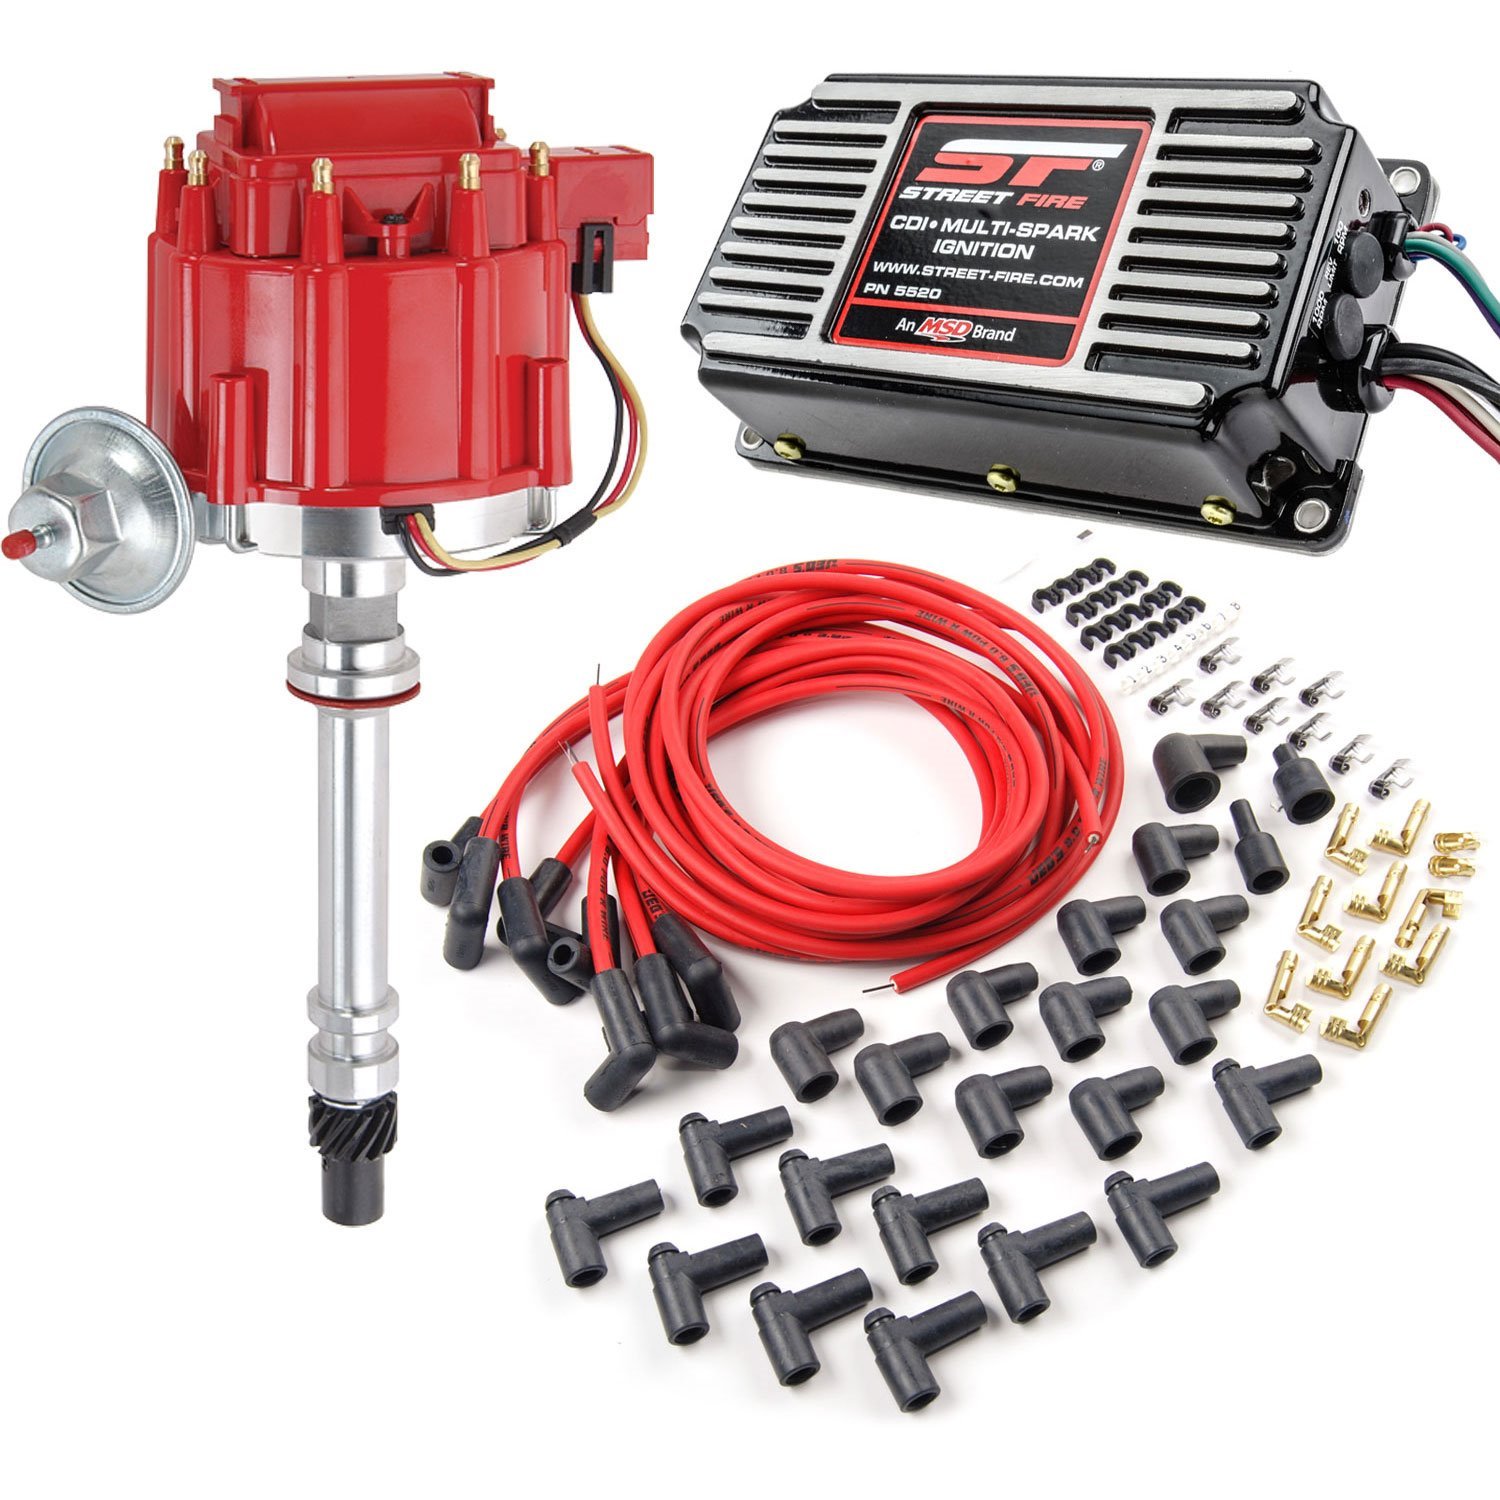 Jegs Performance Products 40005k2 Jegs Hei Street Spark Distributor